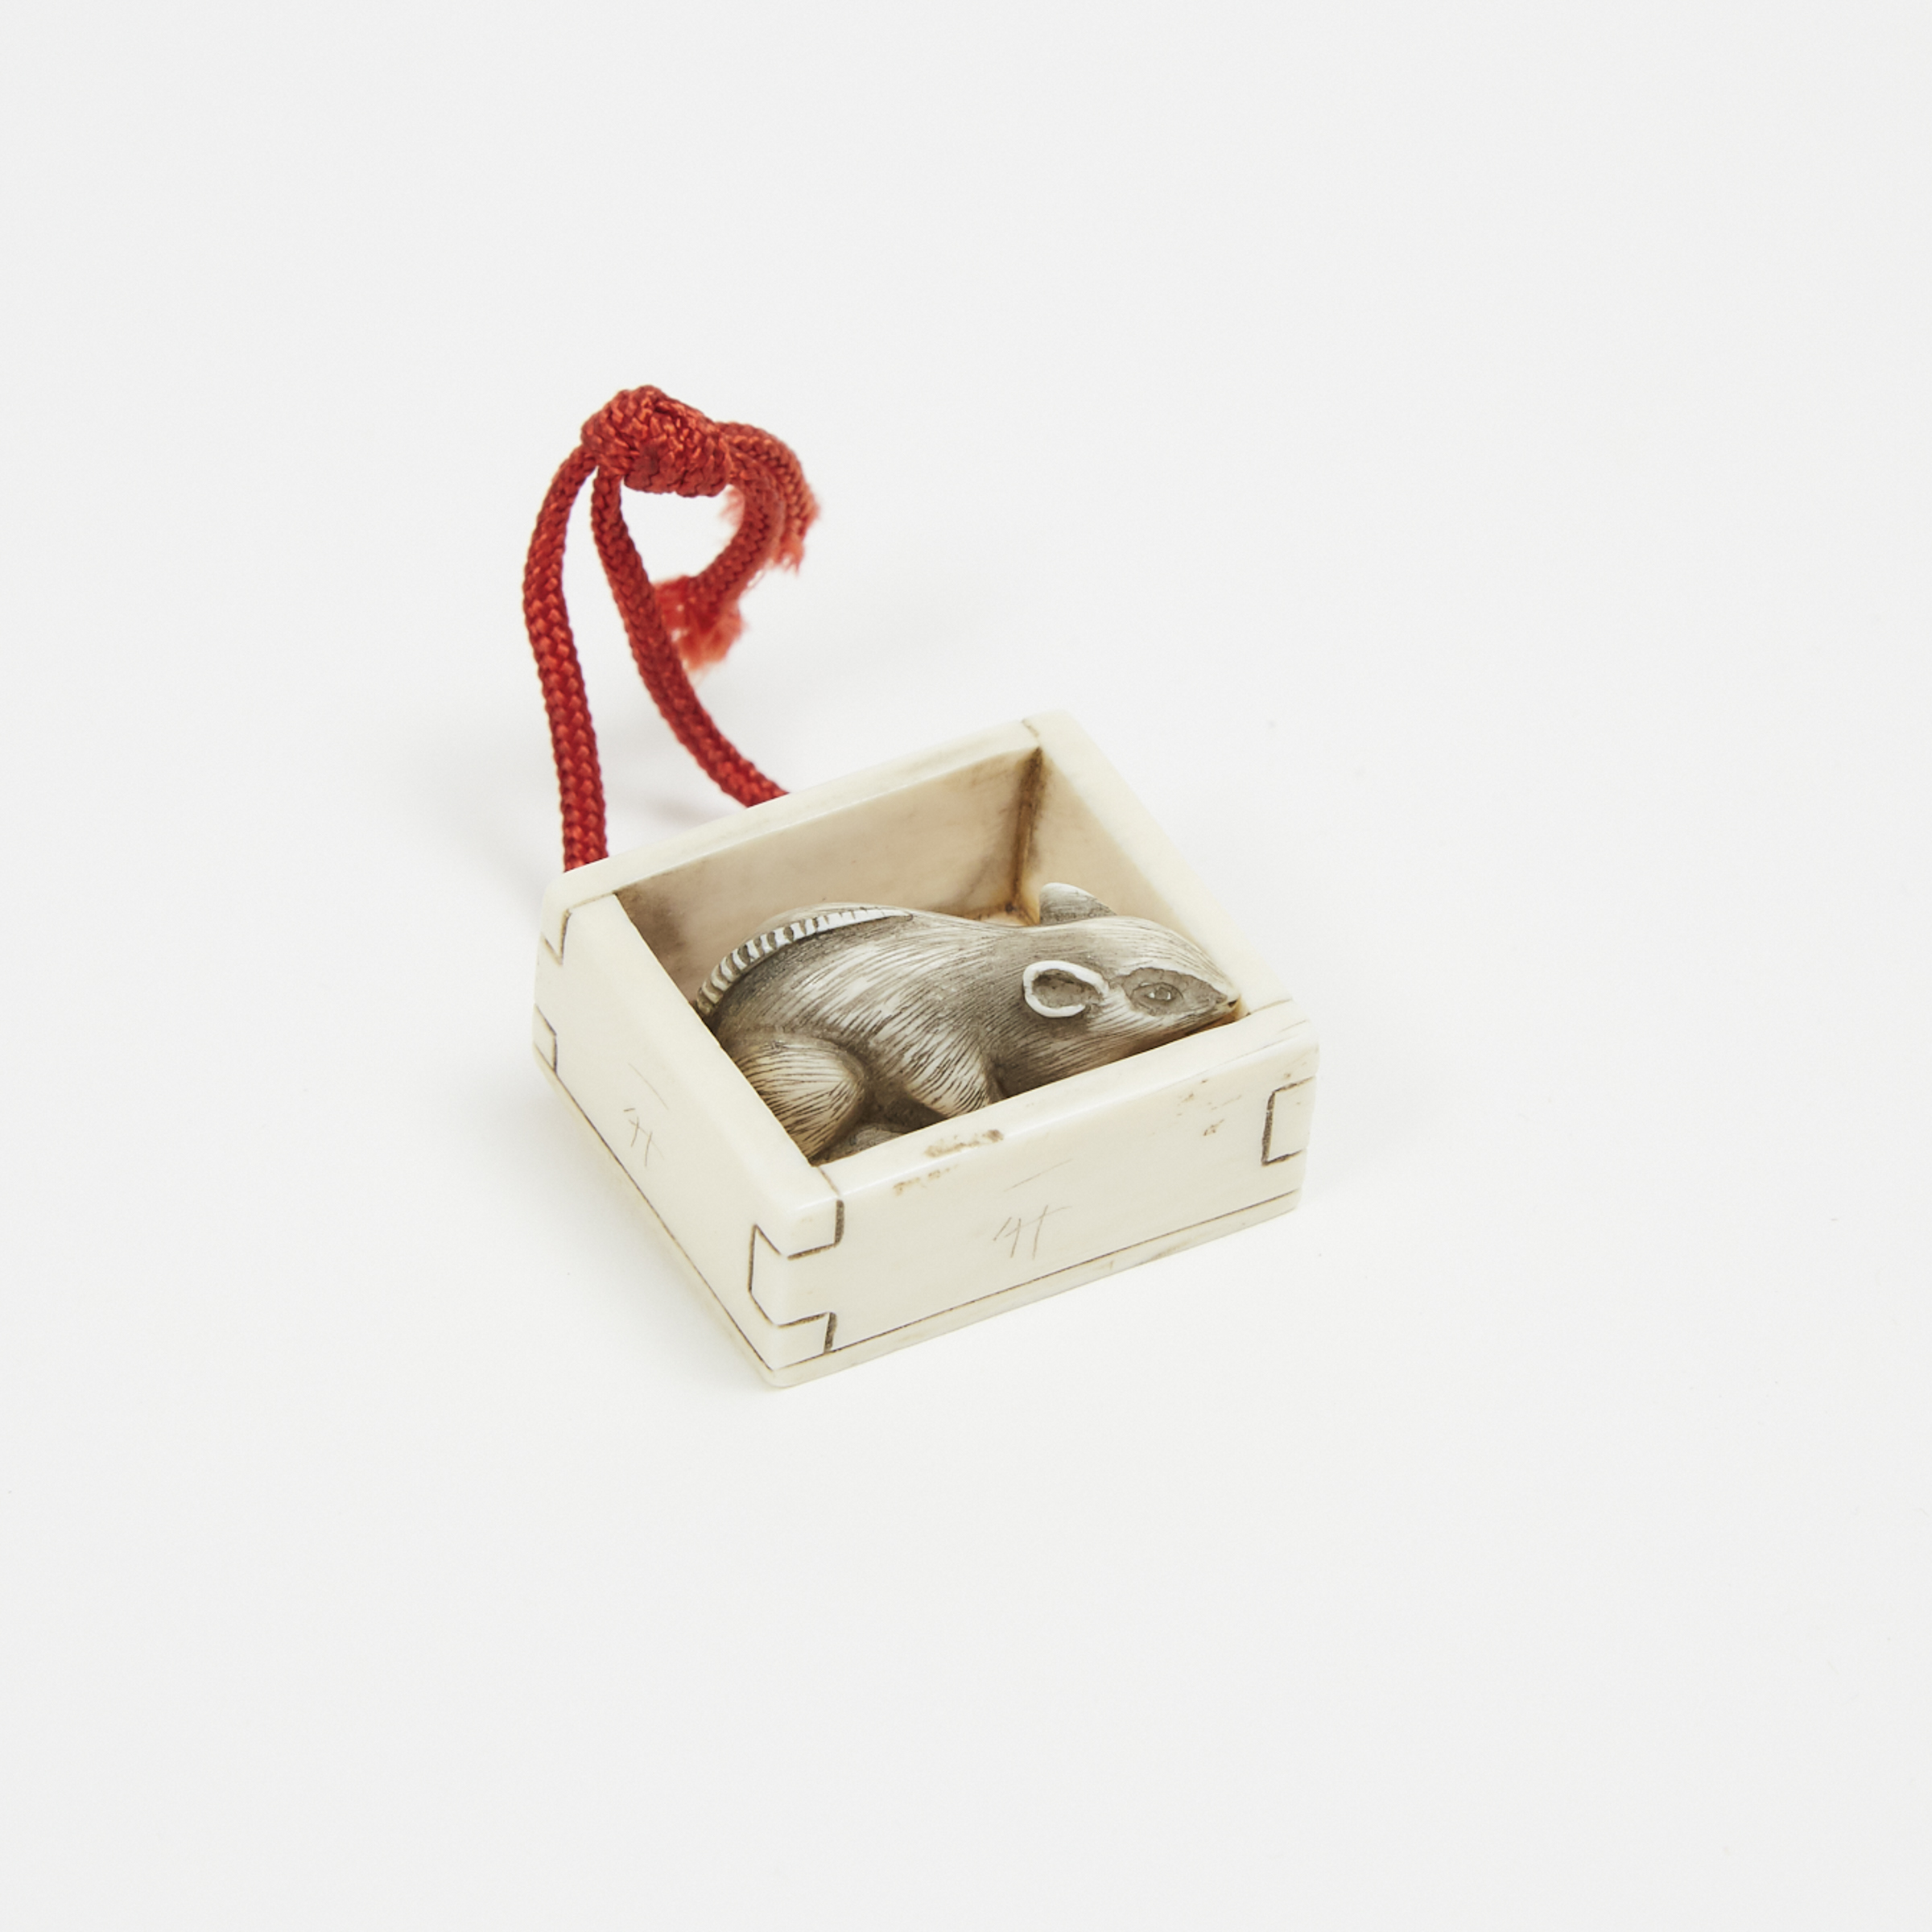 An Ivory Carved Netsuke of a Rat and Box, Signed Tomokazu, 18th Century or Later